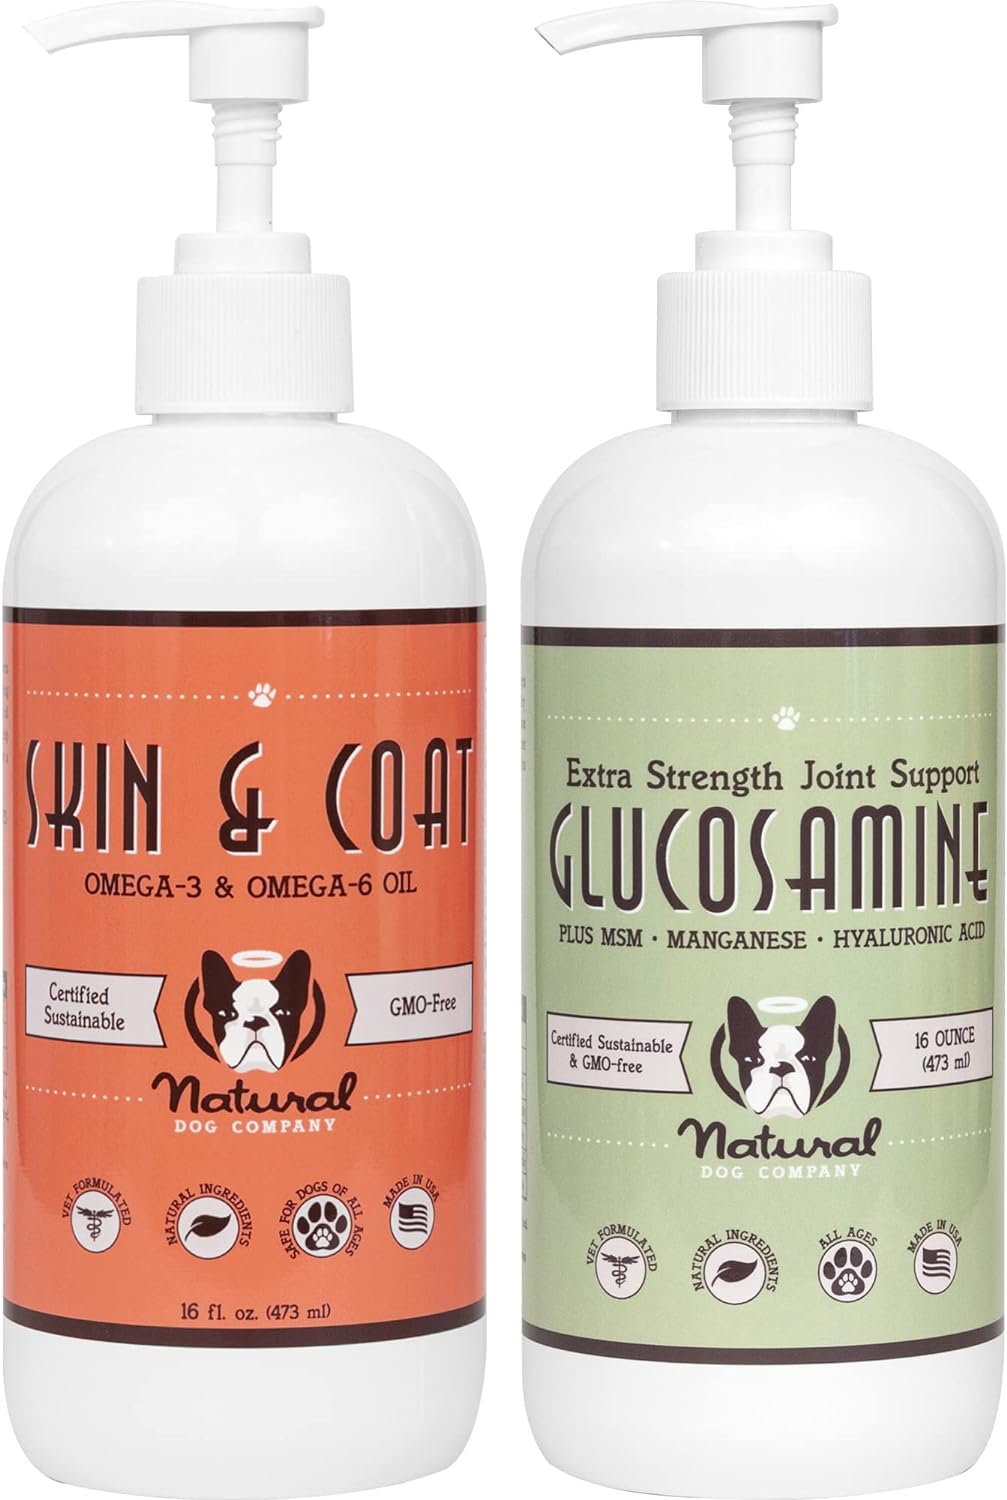 Healthy Joints, Skin and Coat Bundle for Dogs, Includes (1) 16 oz Bottle Natural Dog Company Skin and Coat Oil, (1) 16 oz Bottle Liquid Glucosamine, Food Topper, Dog's Fish Oil Supplement